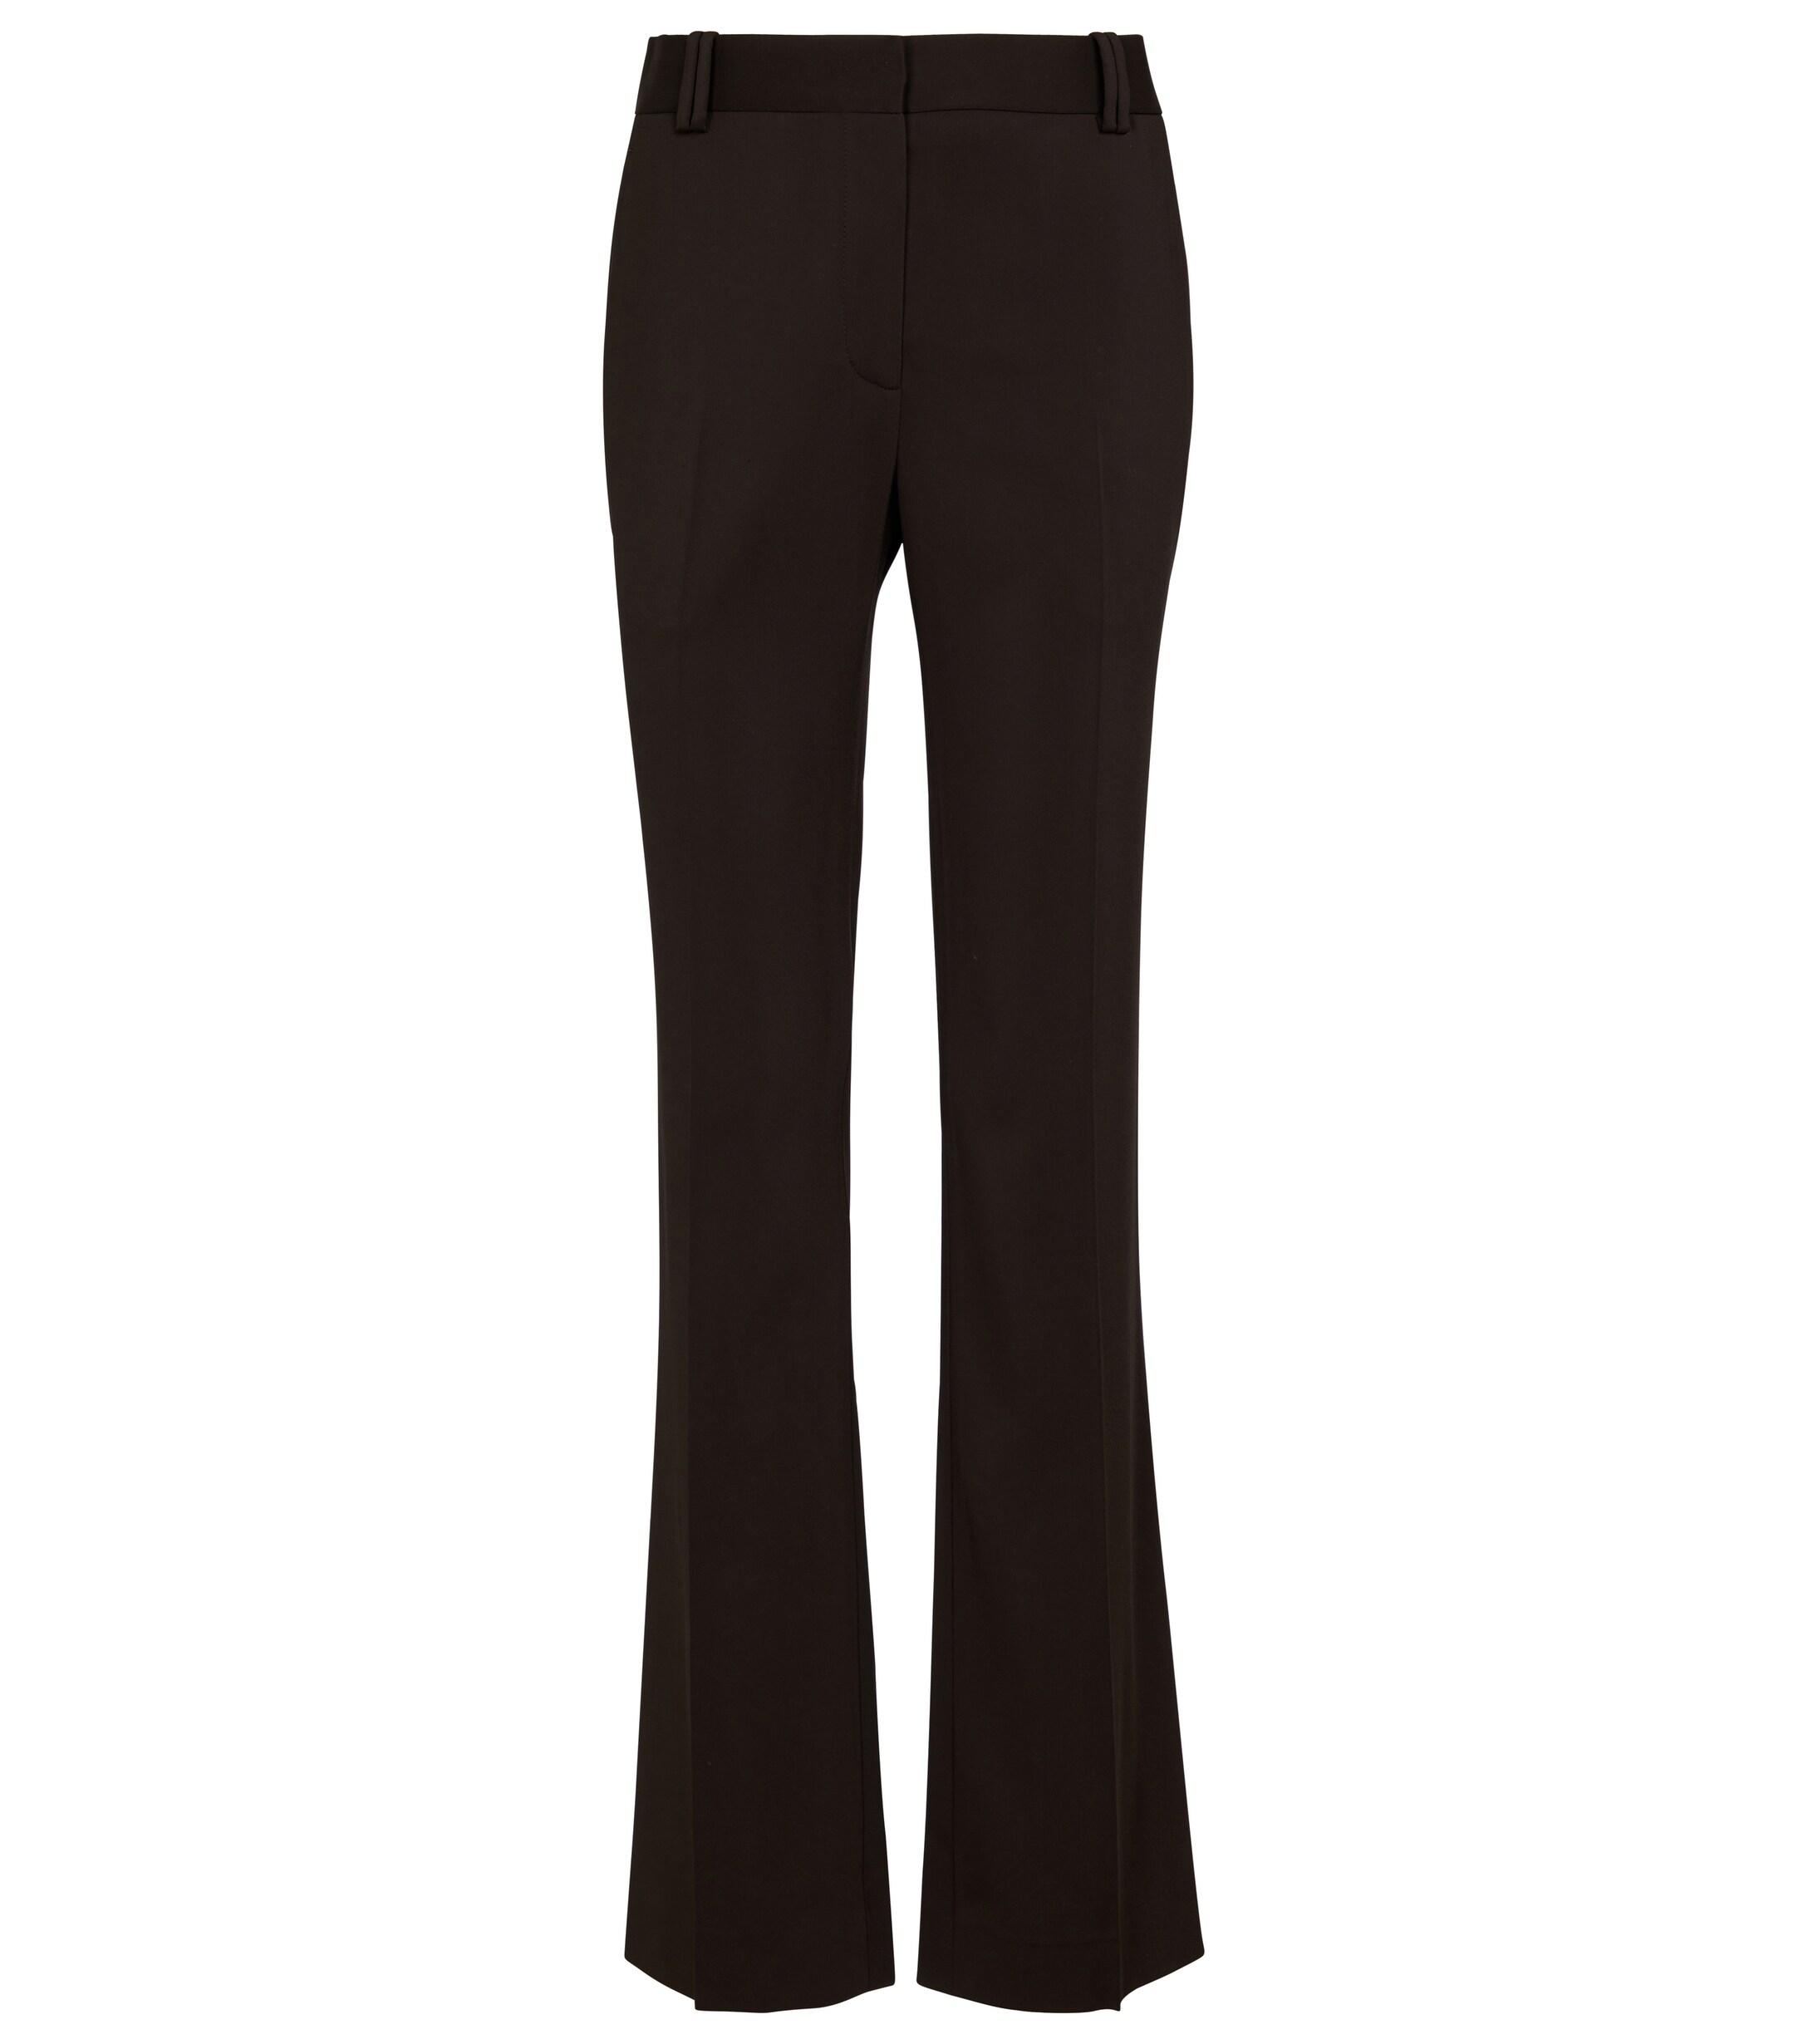 Slacks and Chinos Slacks and Chinos The Row Trousers The Row Synthetic Tezza High-rise Twill Pants in Brown Womens Trousers Black 